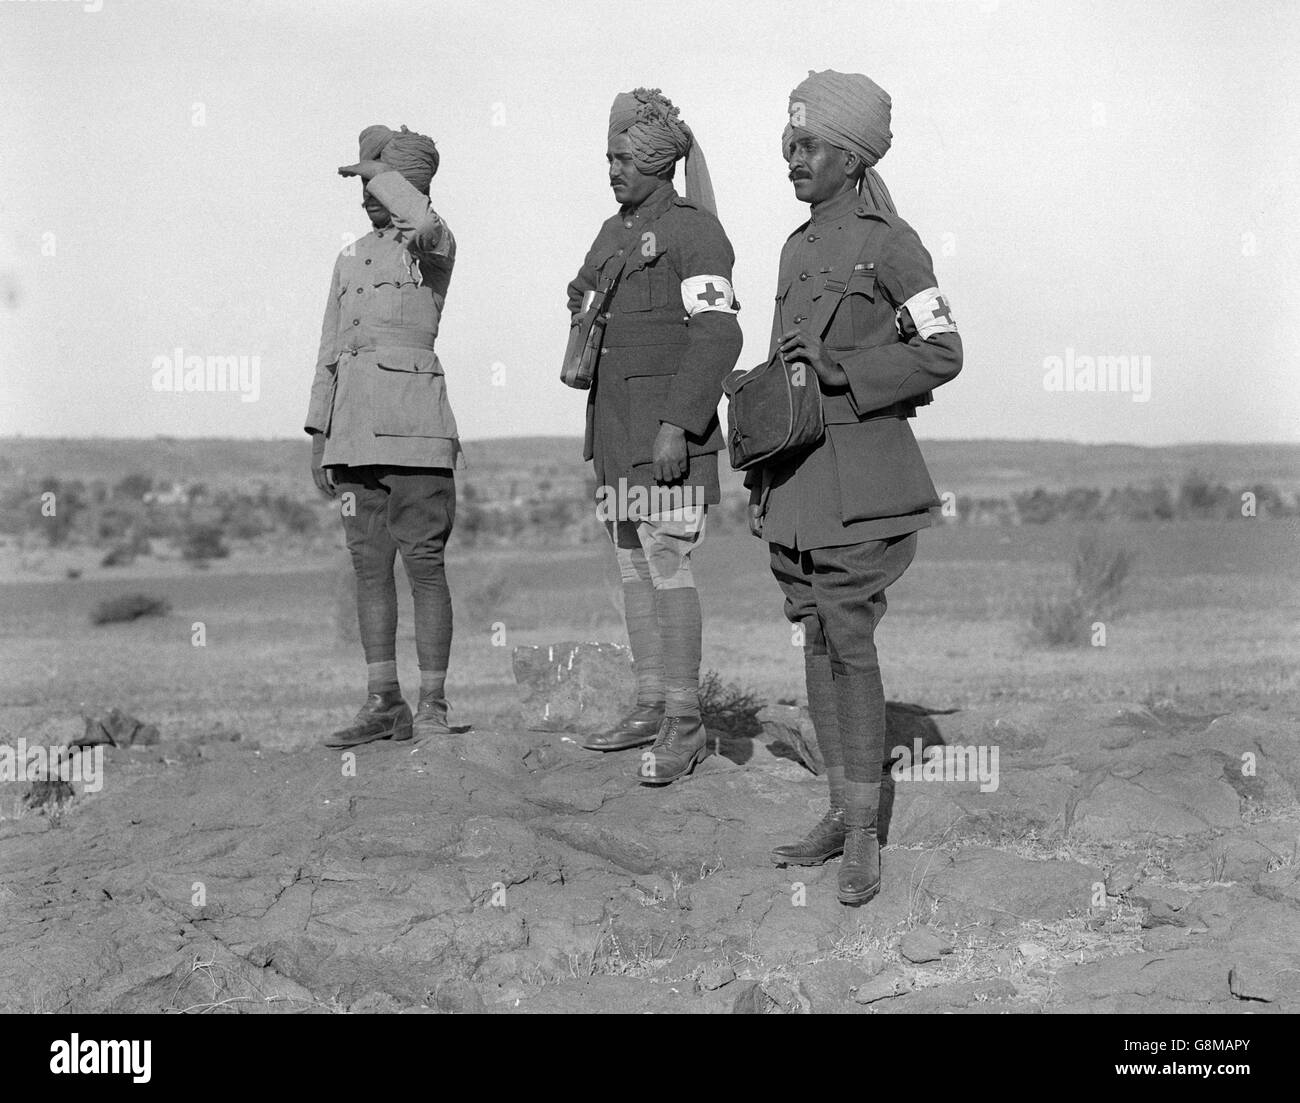 Prince Of Wales Indien Tour - 1921 Stockfoto